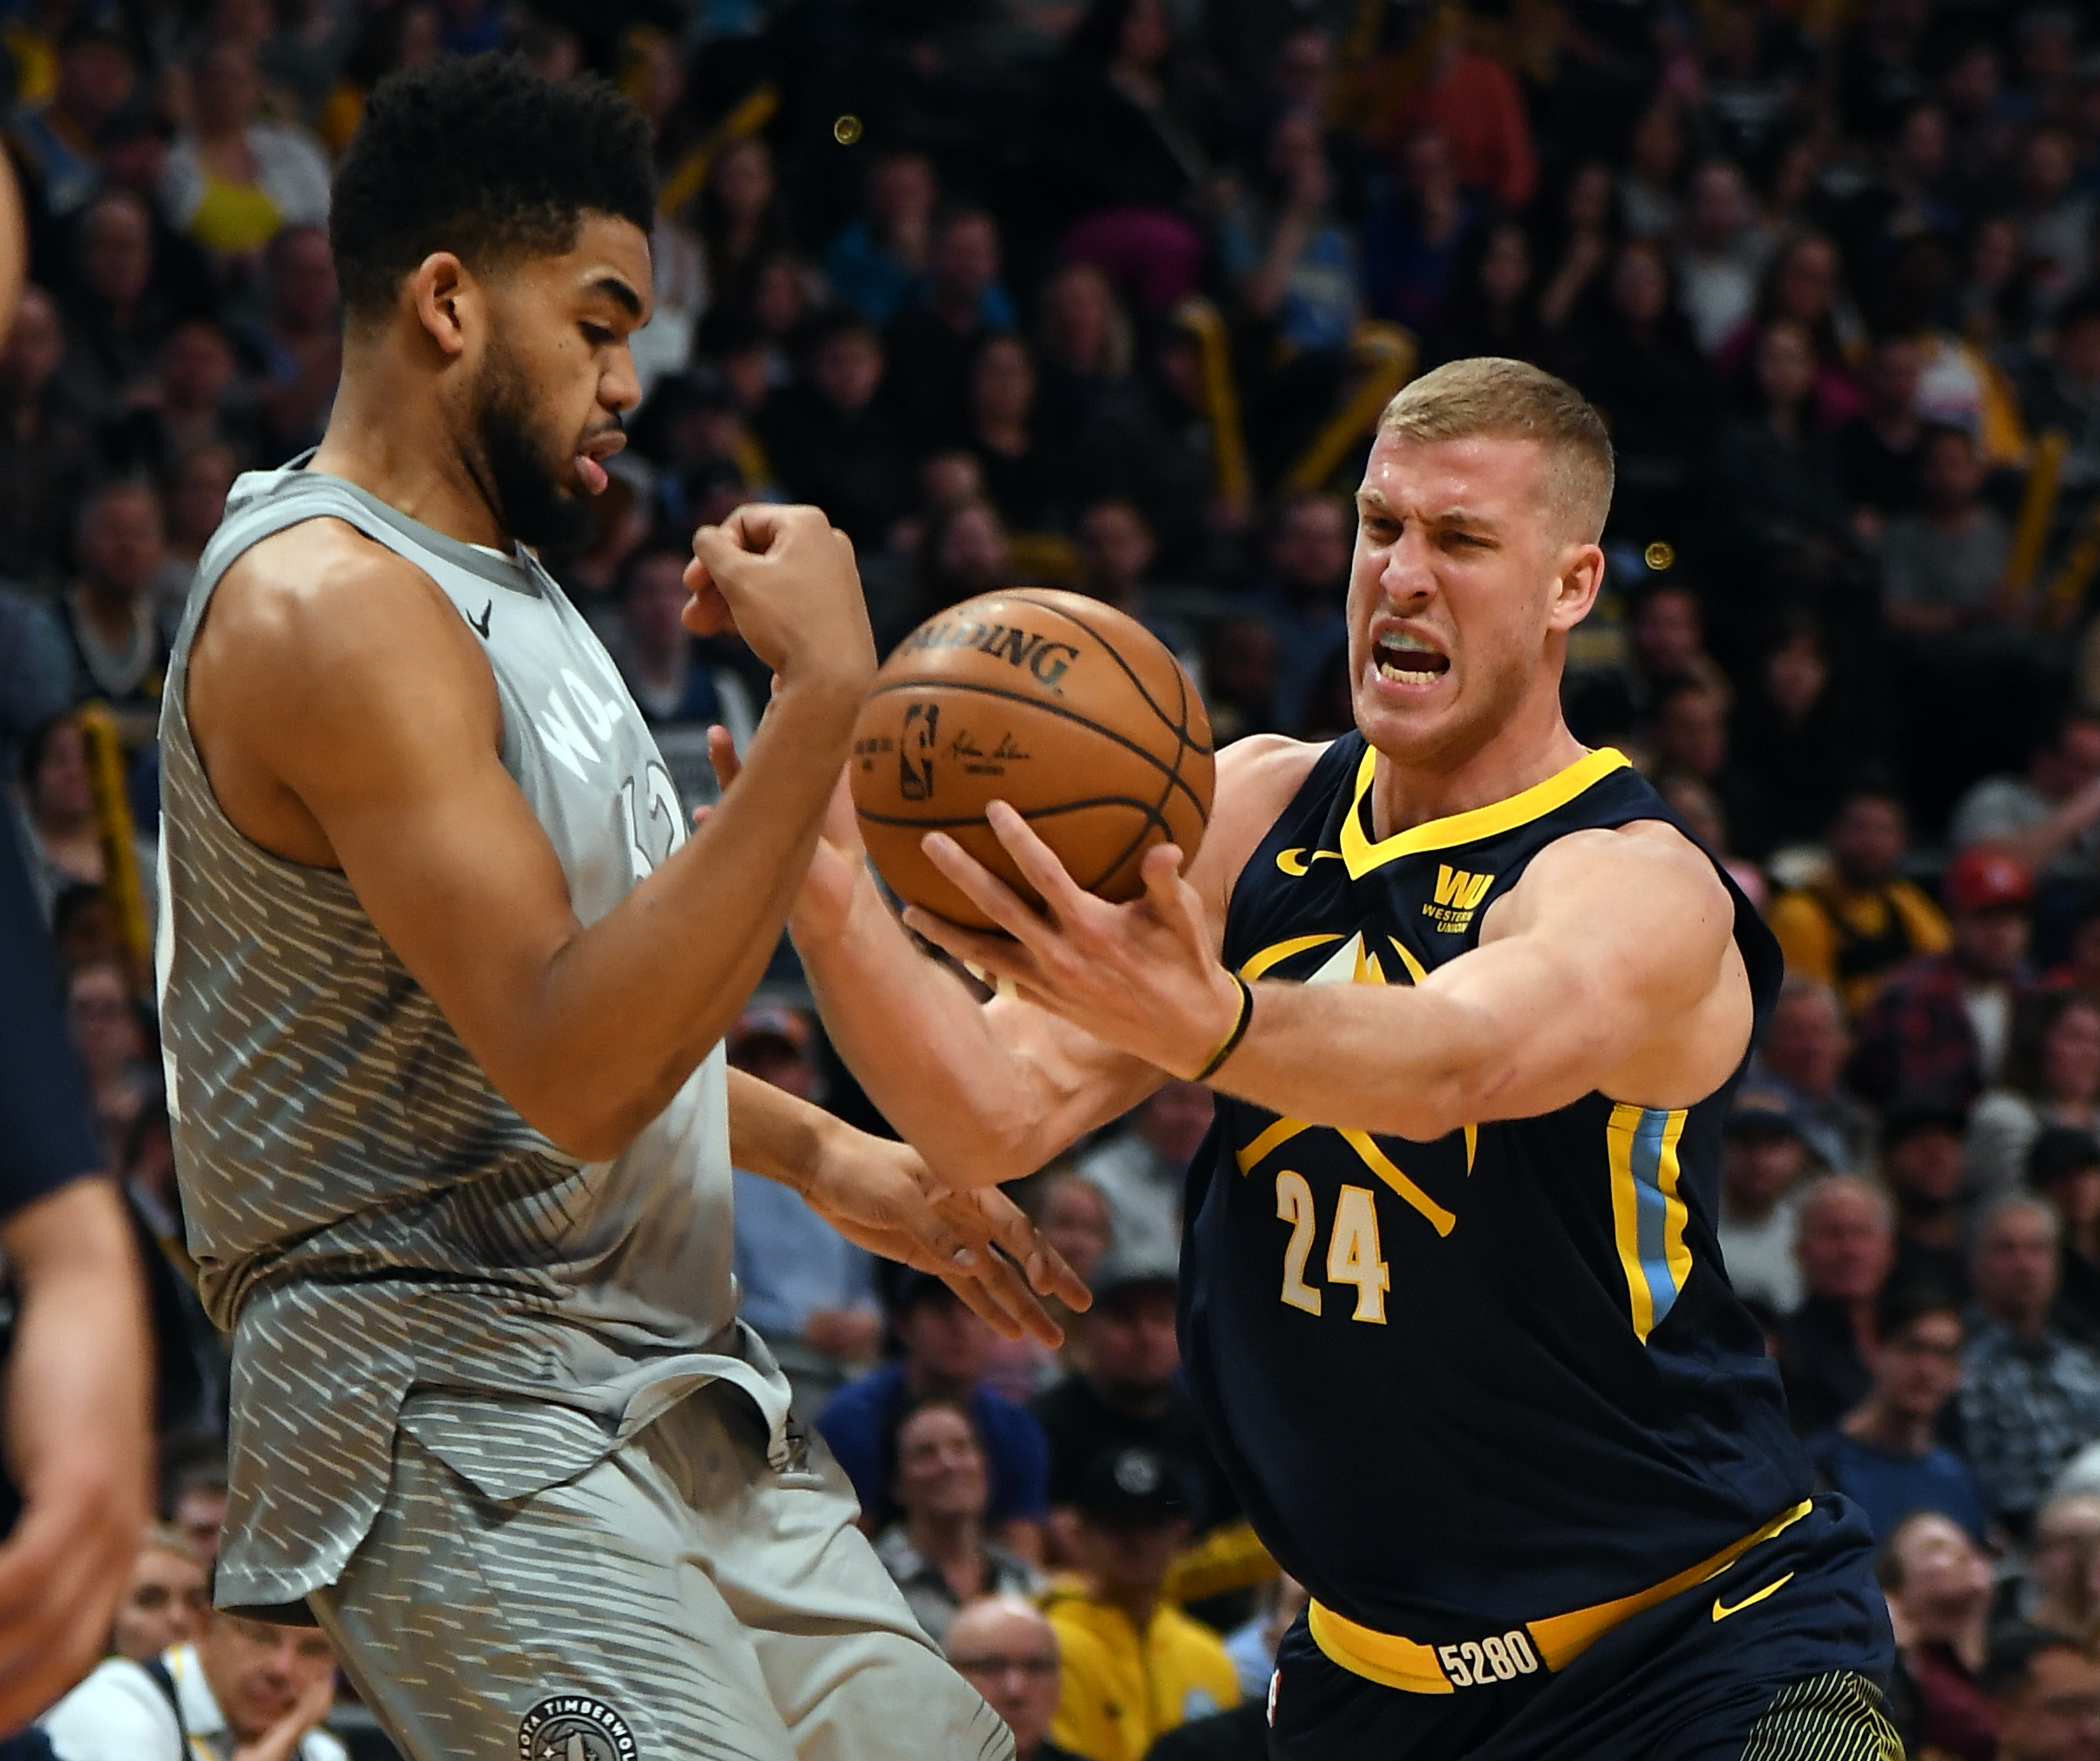 Denver Nuggets center Mason Plumlee (24) just about loses control of the ball as Minnesota Timberwolves center Karl-Anthony Towns (32) swipes at it during the second quarter on April 5, 2018 at Pepsi Center. (Photo by John Leyba/The Denver Post via Getty Images)